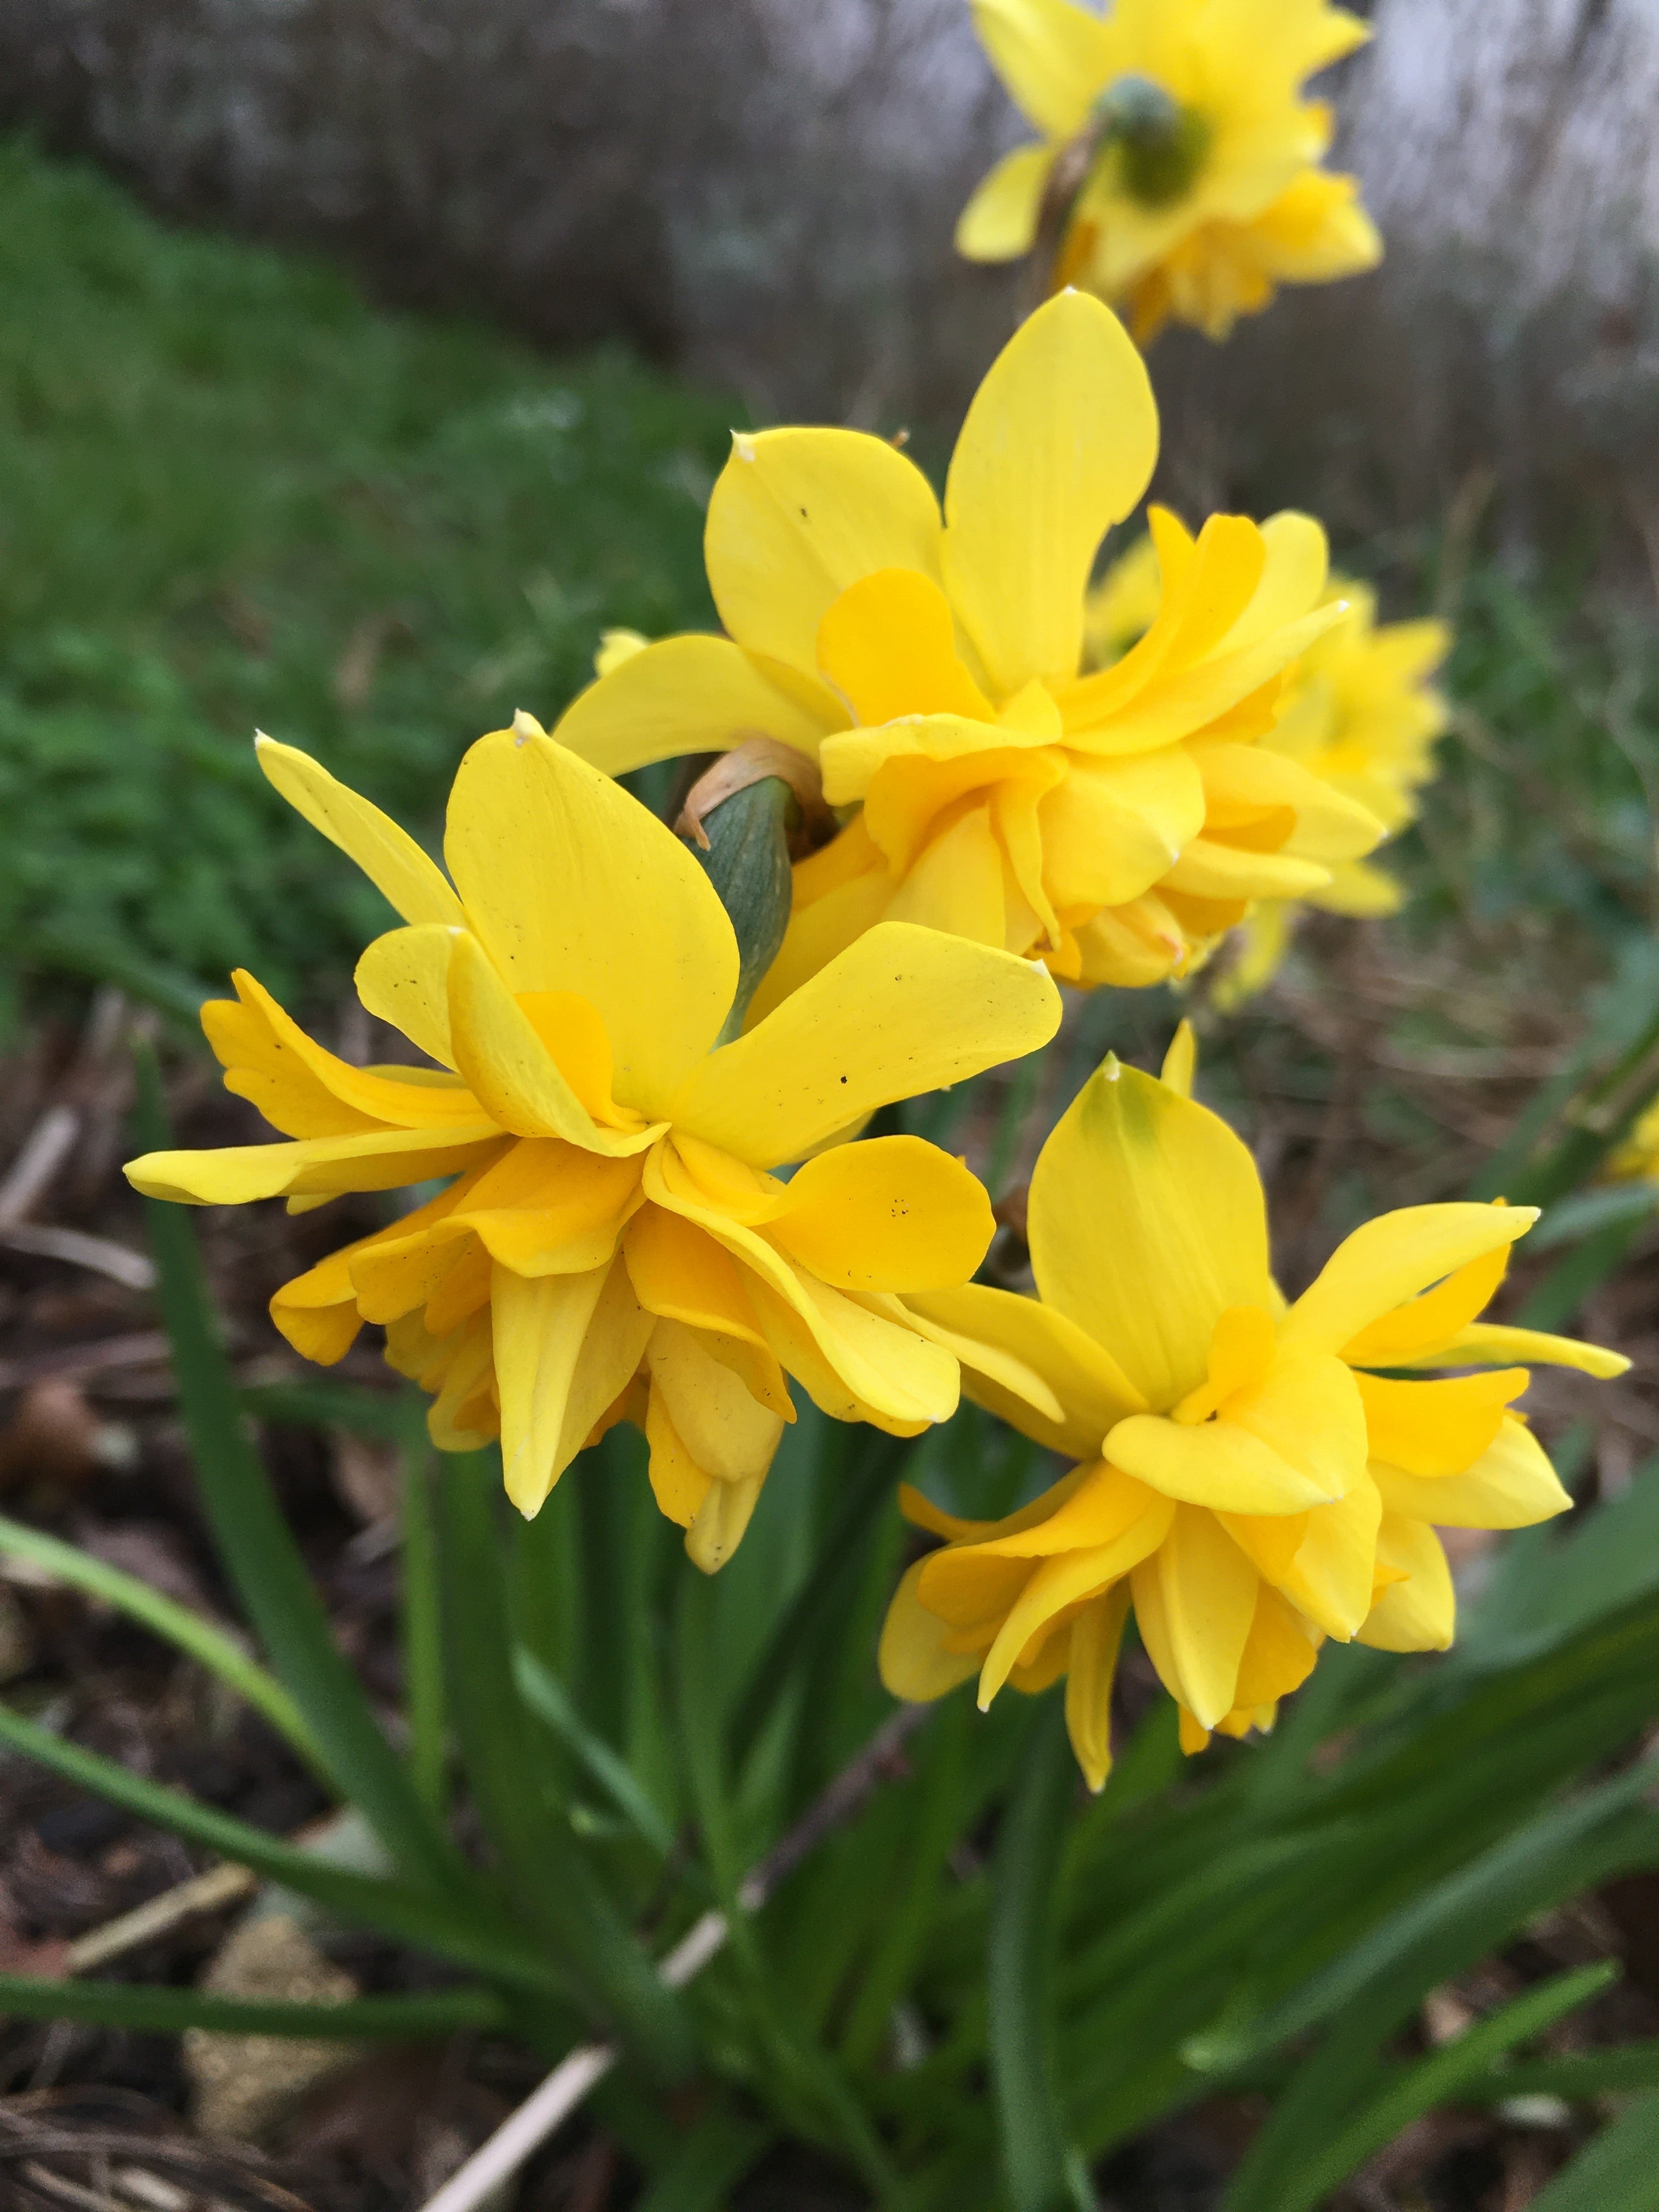 Narcissus 'Double Campernelle' Bulbs (Free UK Postage)